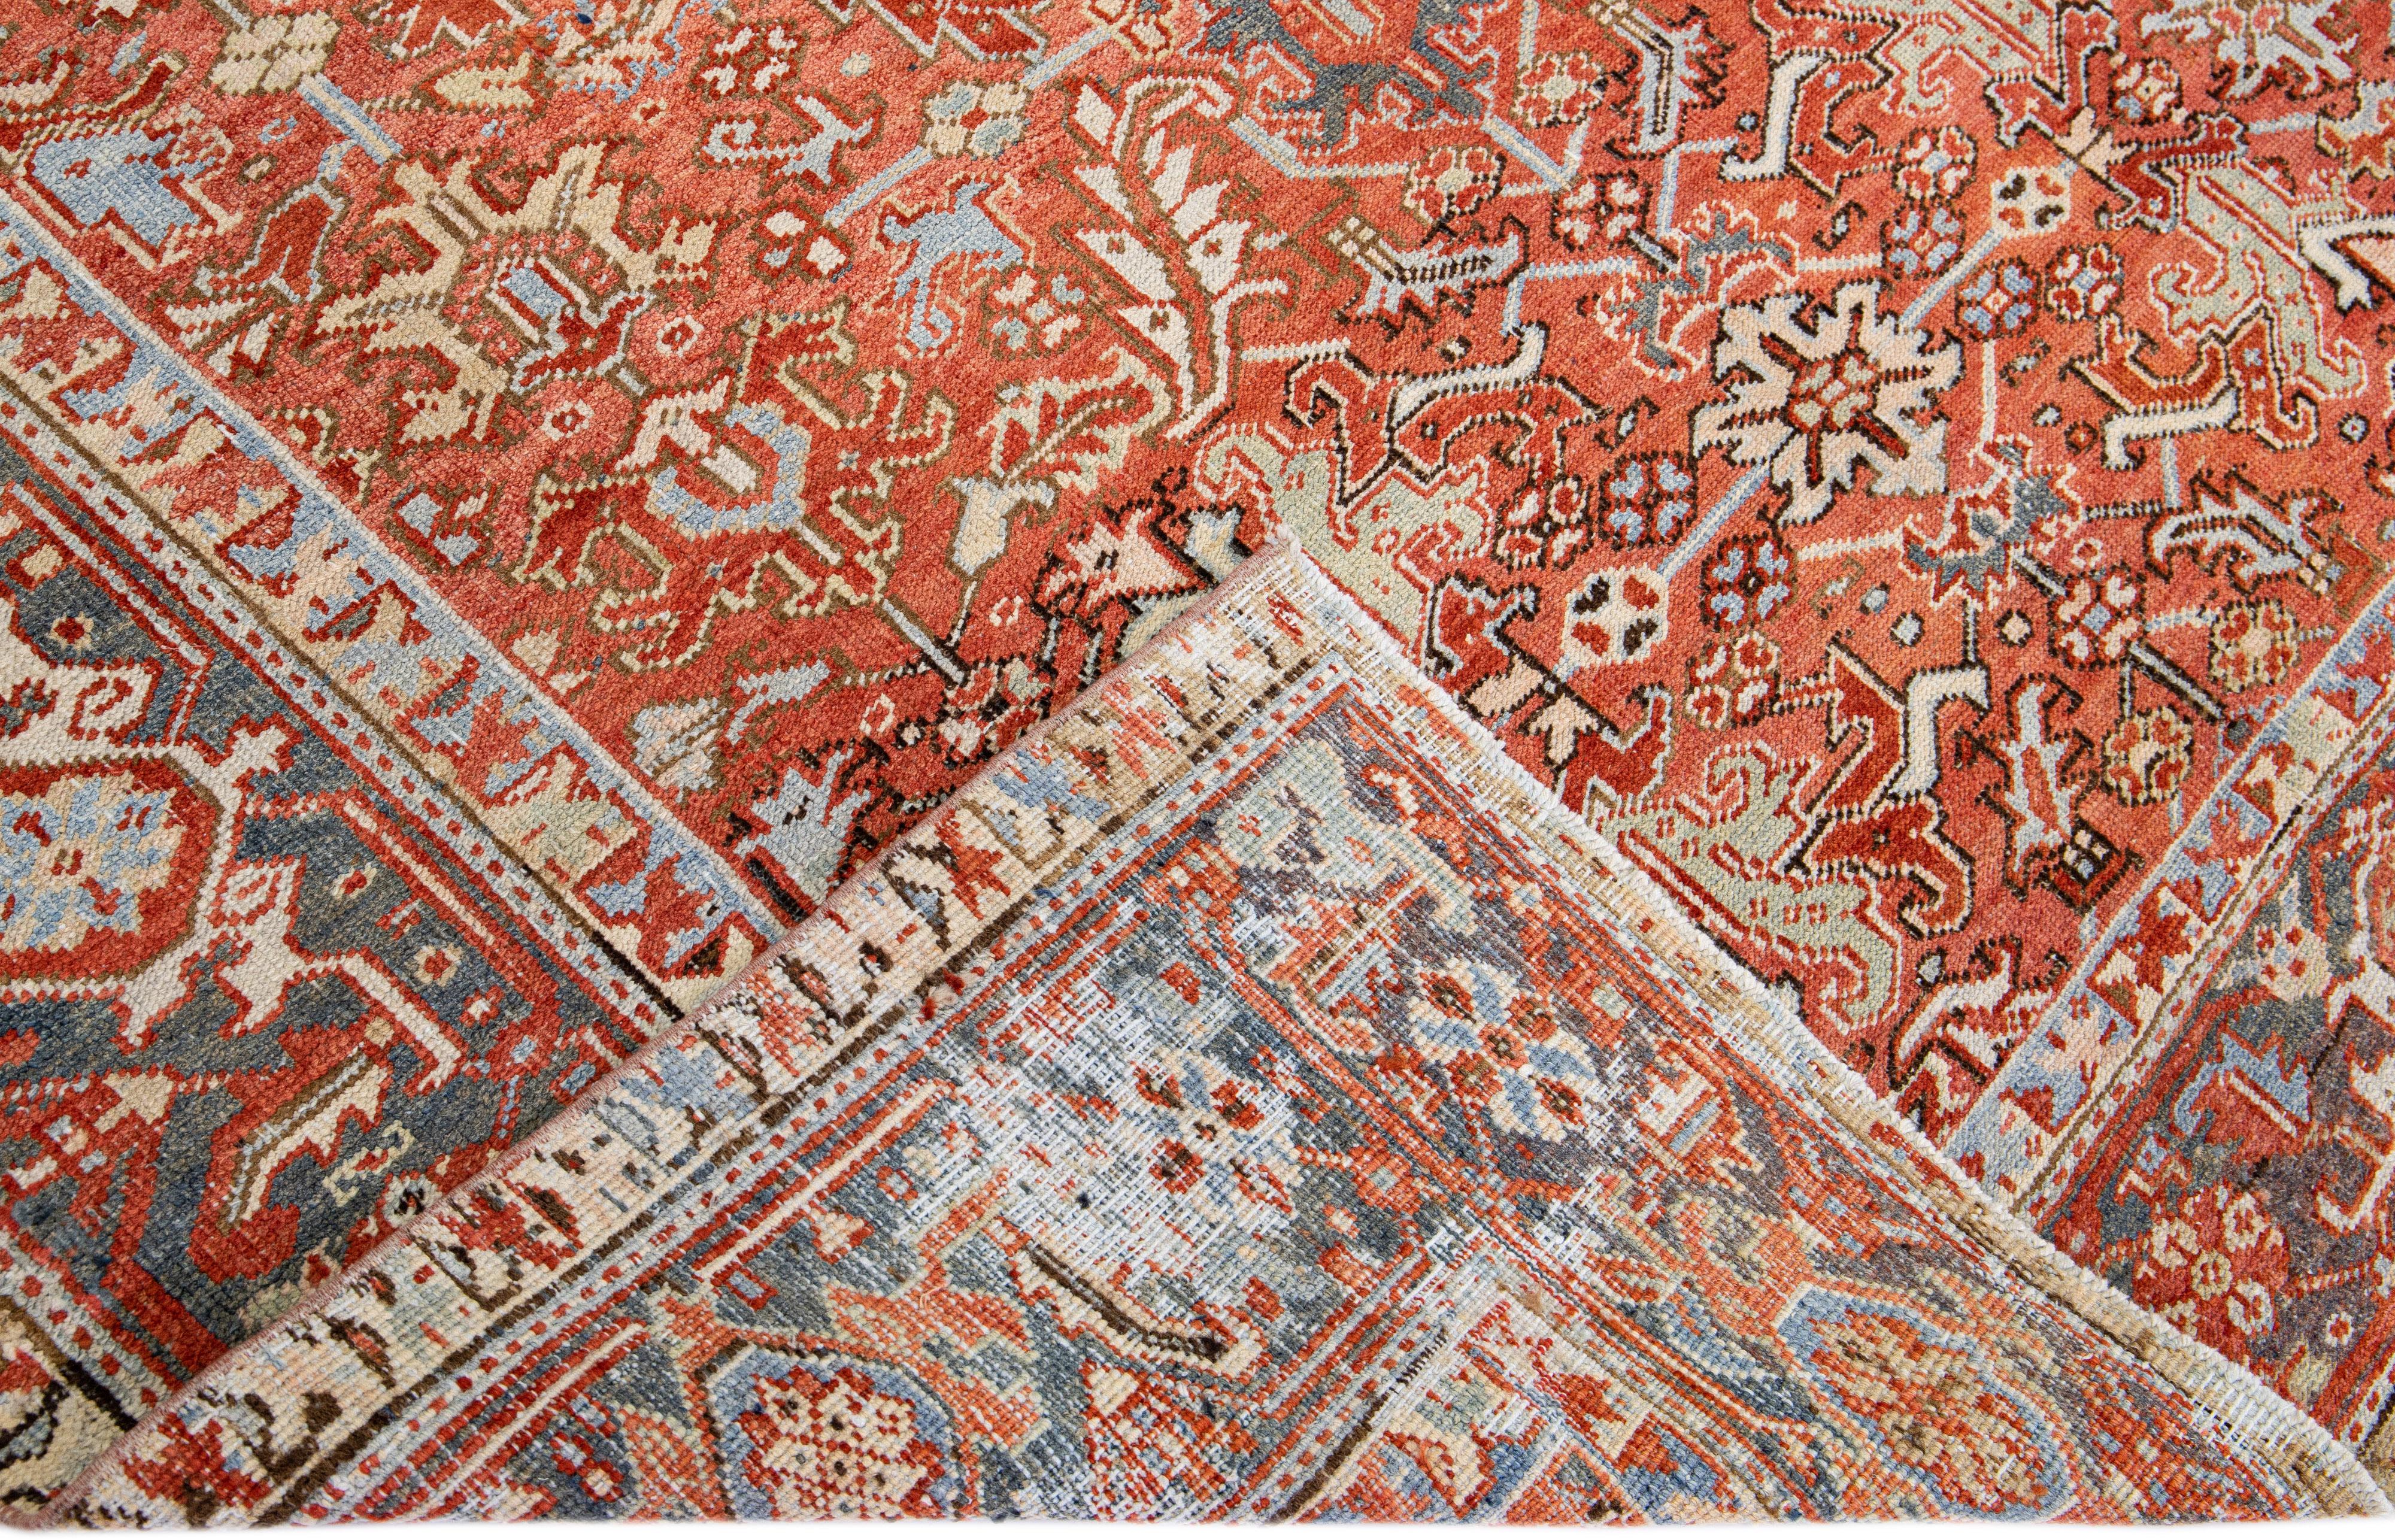 Beautiful antique Heriz Serapi hand-knotted wool rug with an orange-rust field. This Heriz rug has a blue designed frame and multi-color accents that features a gorgeous all-over floral design.

This rug measures: 7' x 9'9